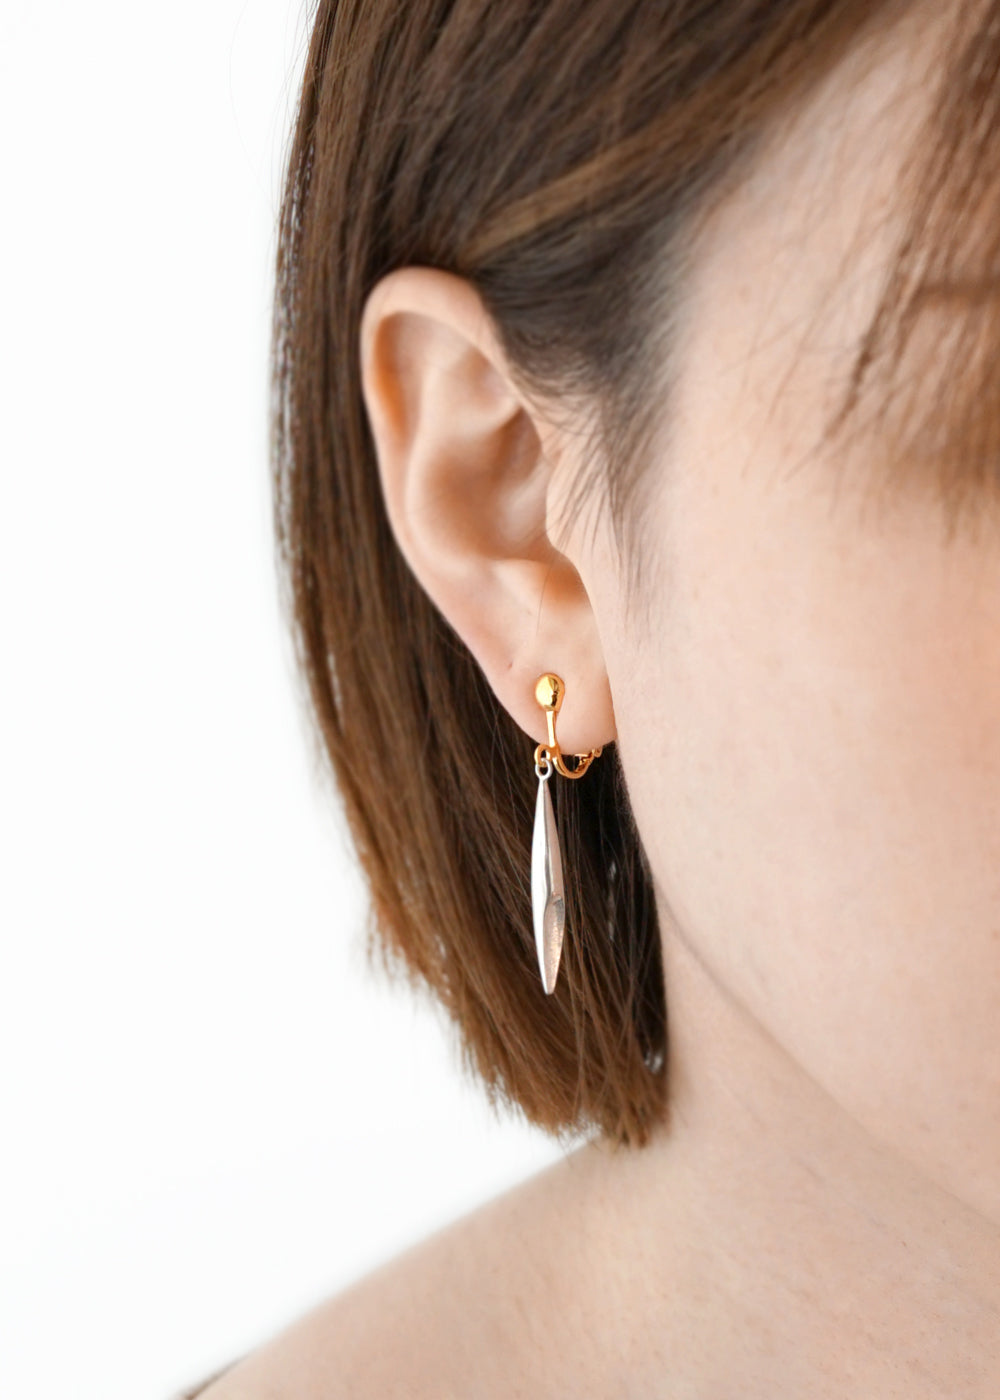 〈RECOLLECTION〉1:3 LONG earring ピアス / イヤリング